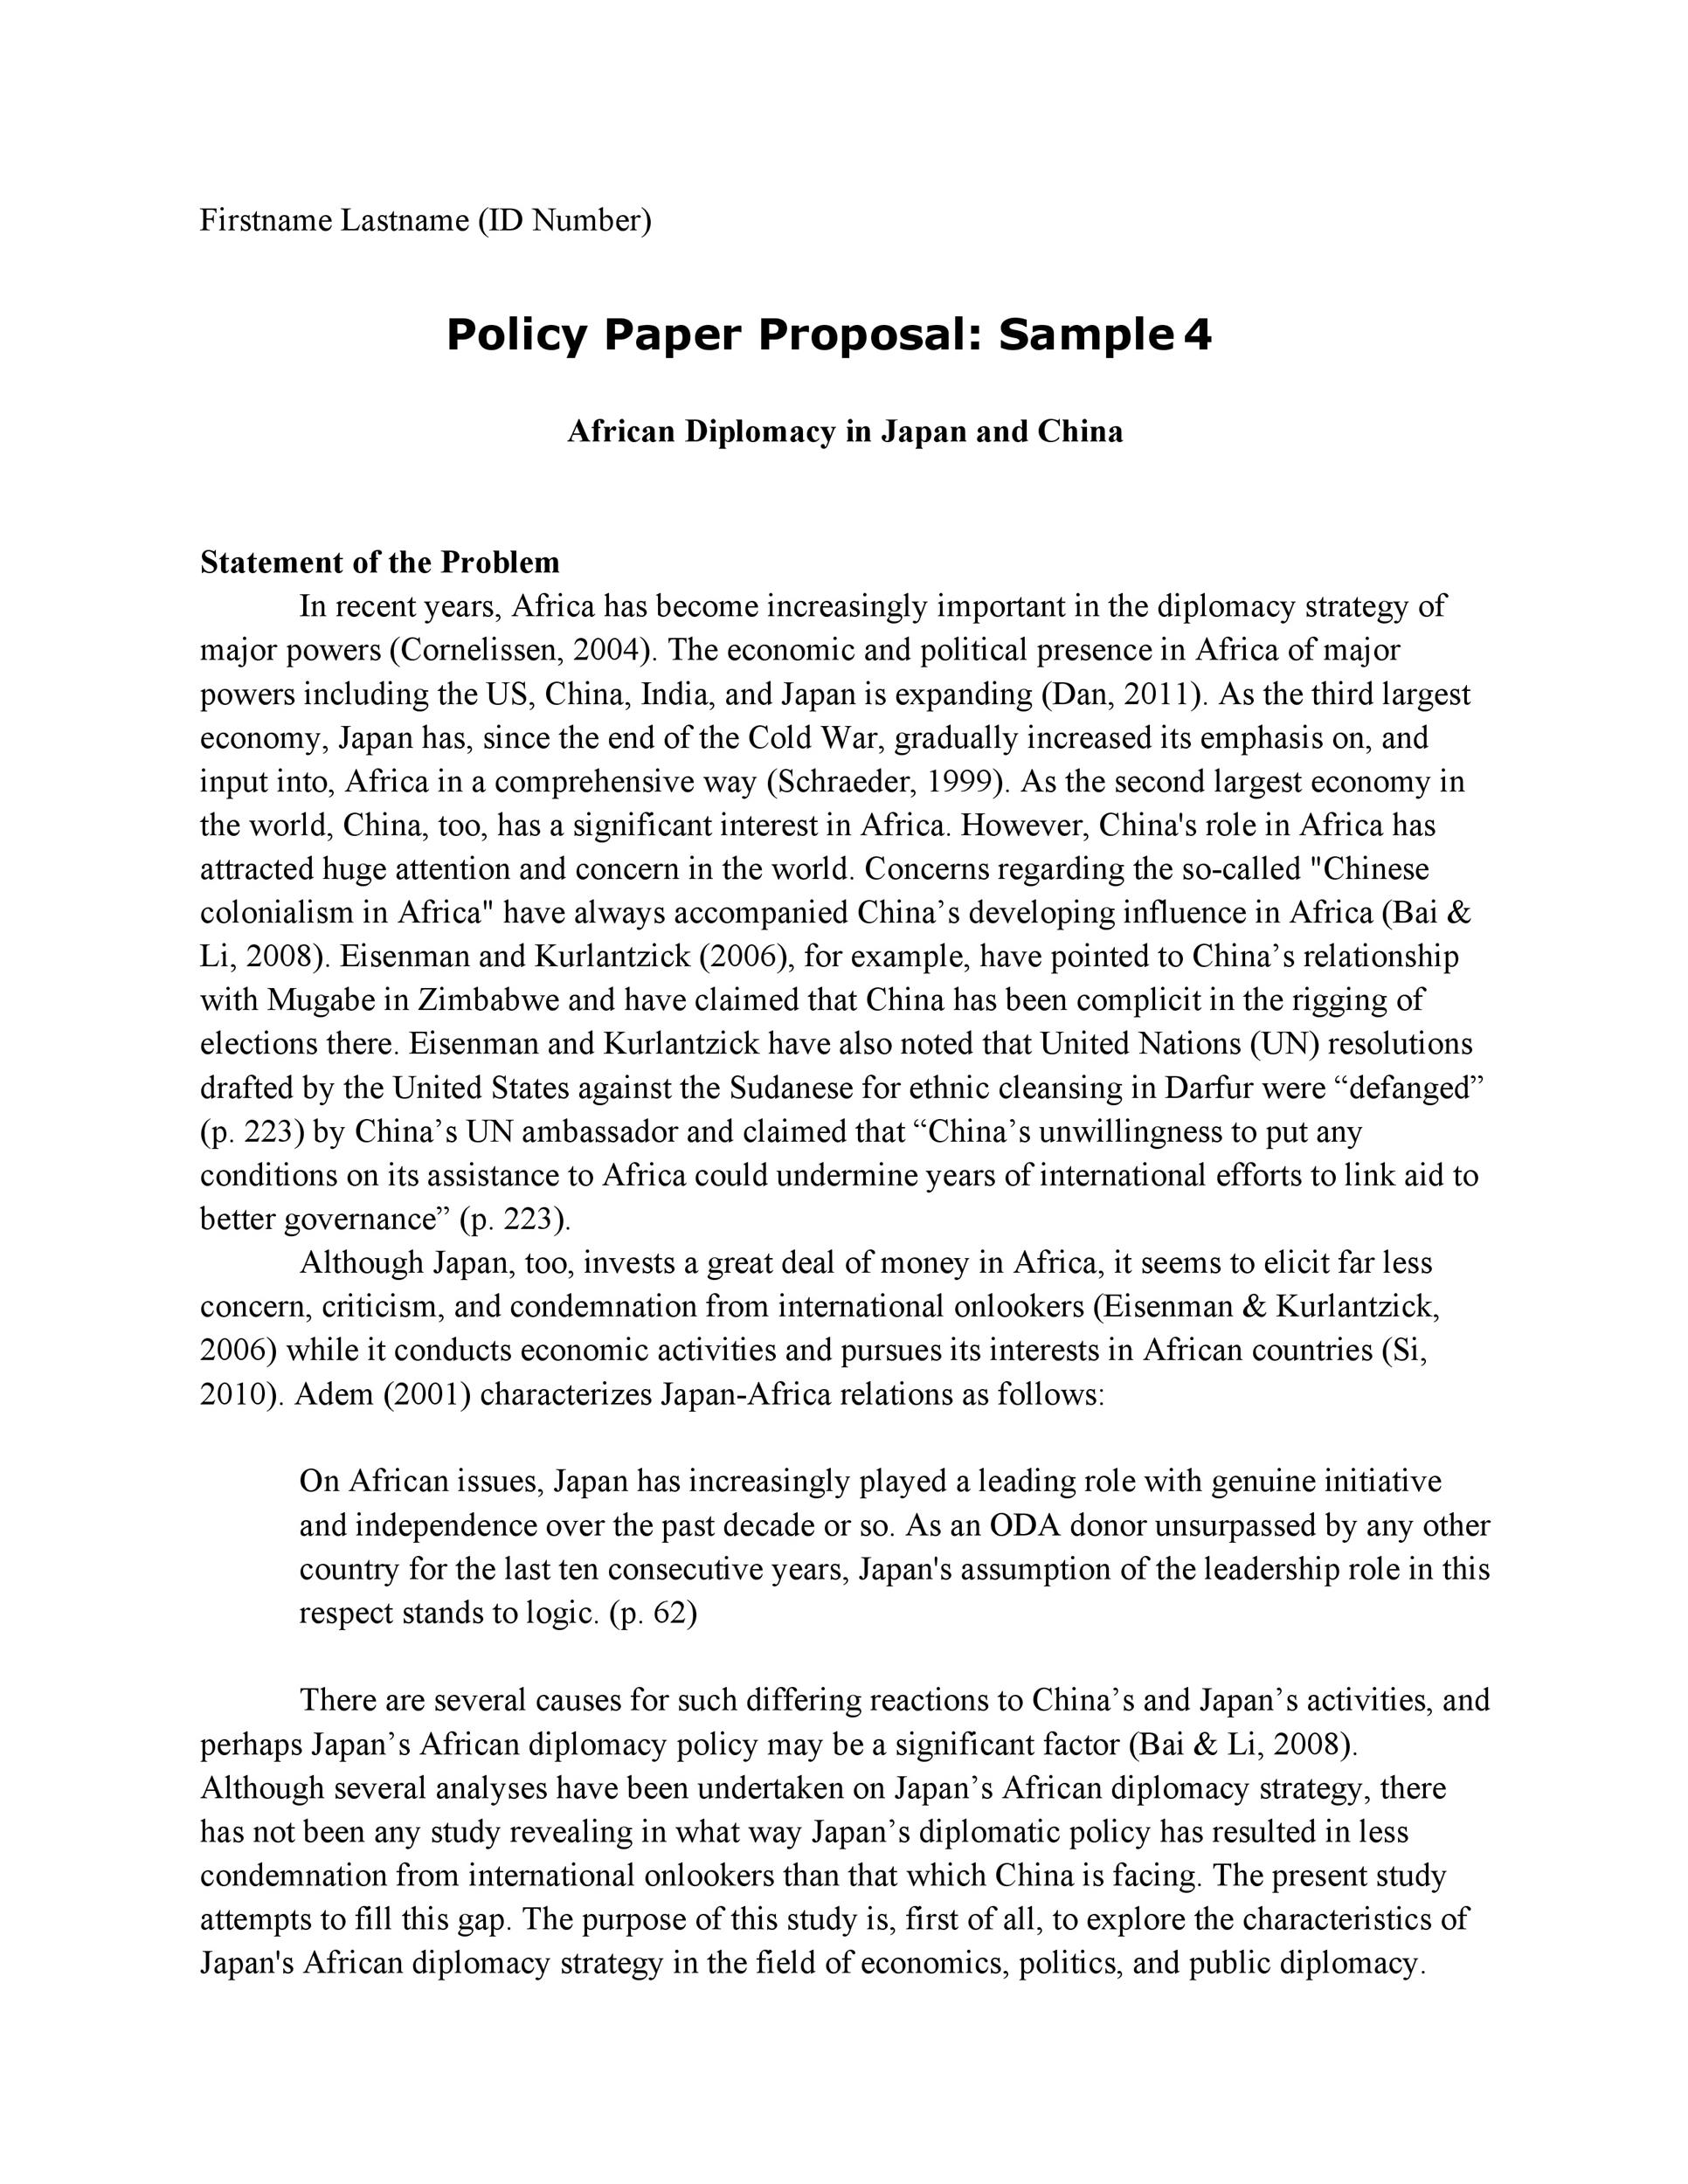 14 Professional Policy Proposal Templates [& Examples] ᐅ TemplateLab